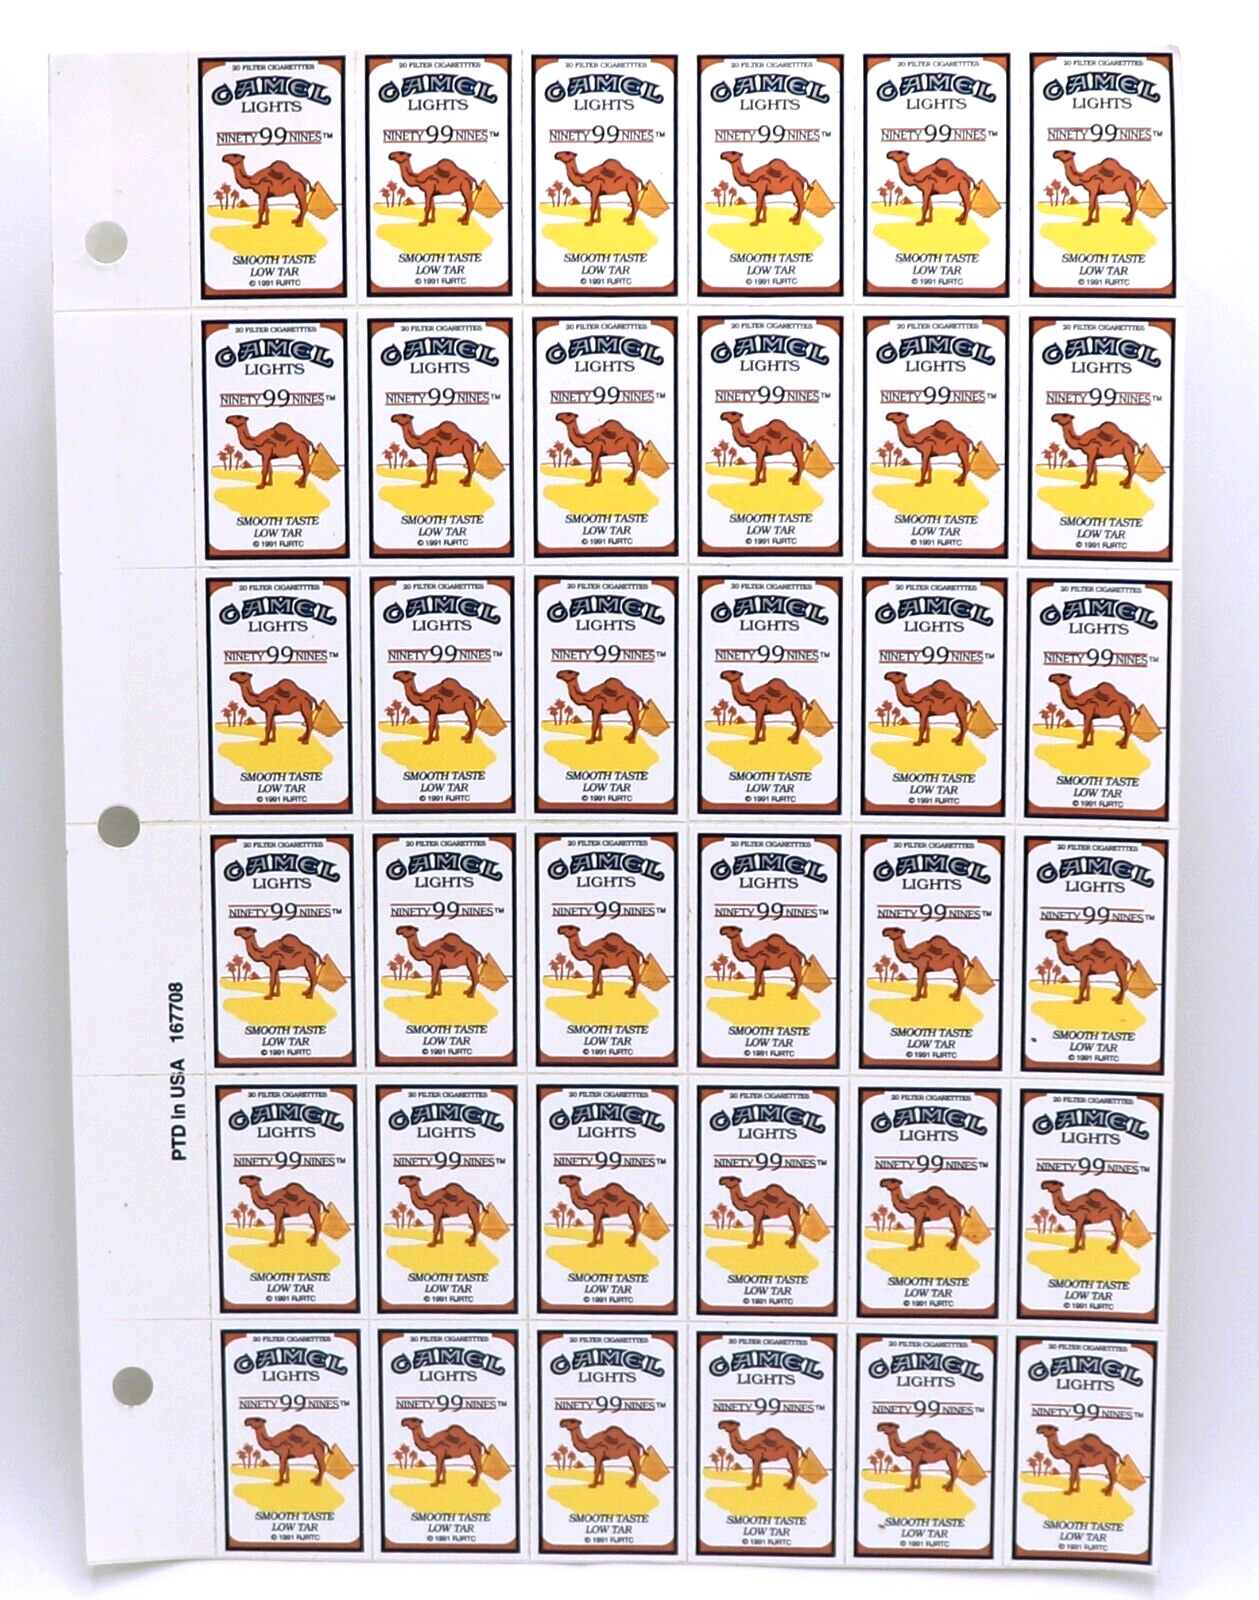 Vintage 1991 Camel Lights - Ninety 99 Nines - Excellent Condition  36 Stickers